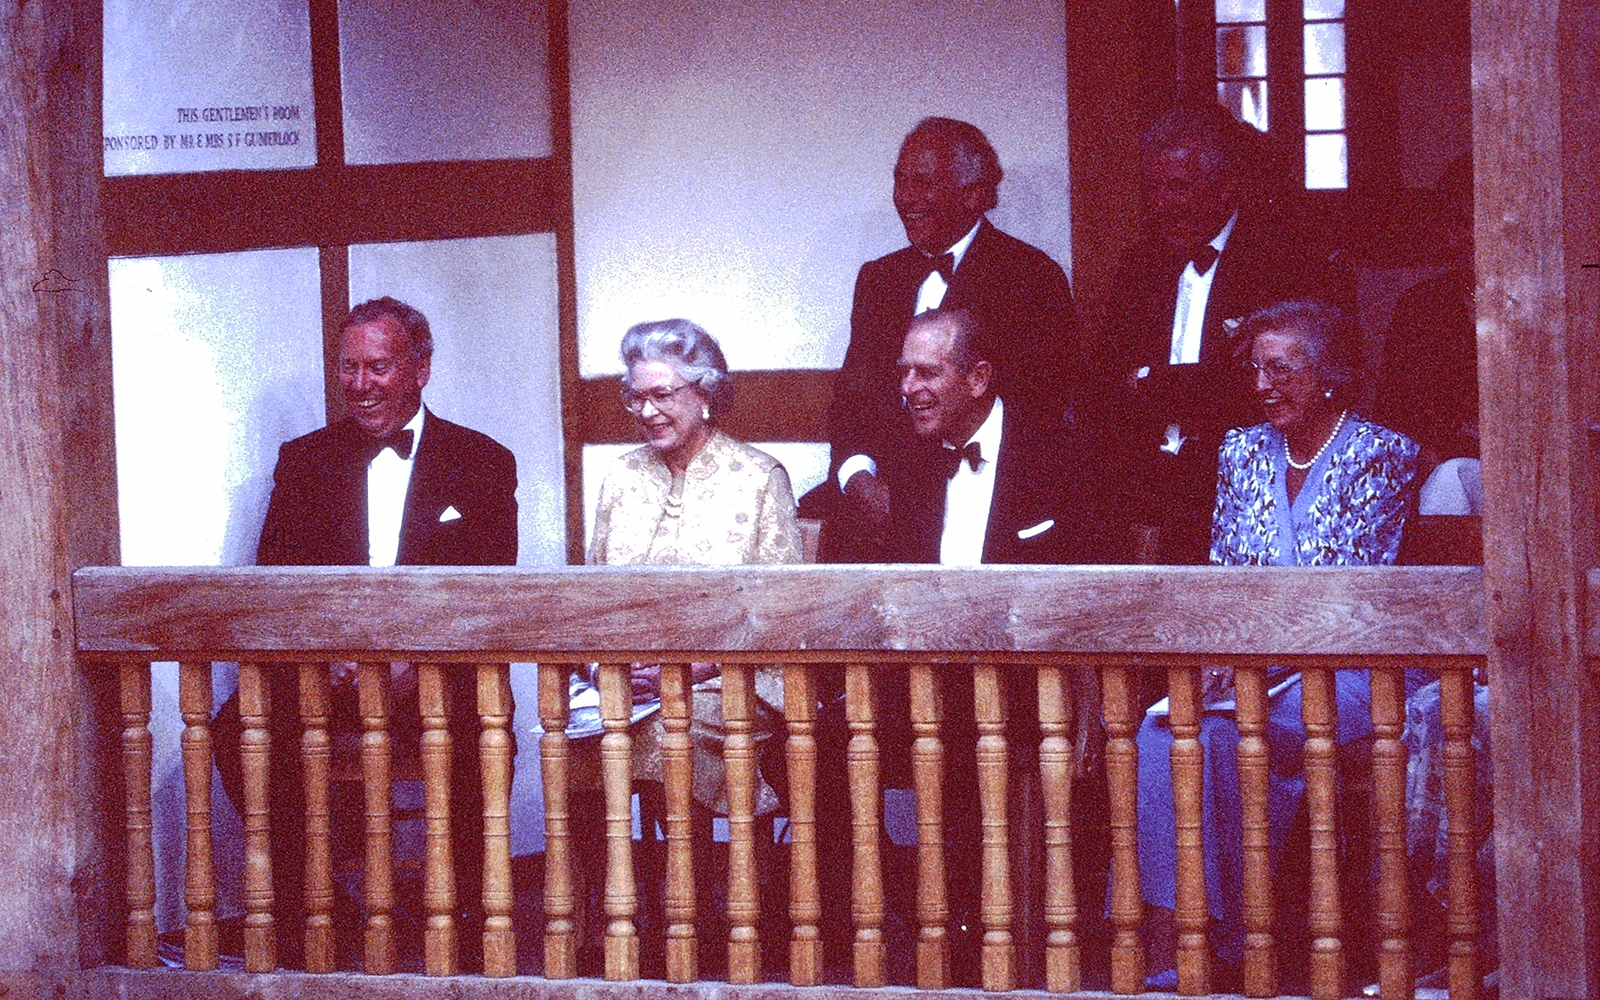 Her Majesty the Queen watches a performance in the Gentleman's Box of the Globe Theatre.